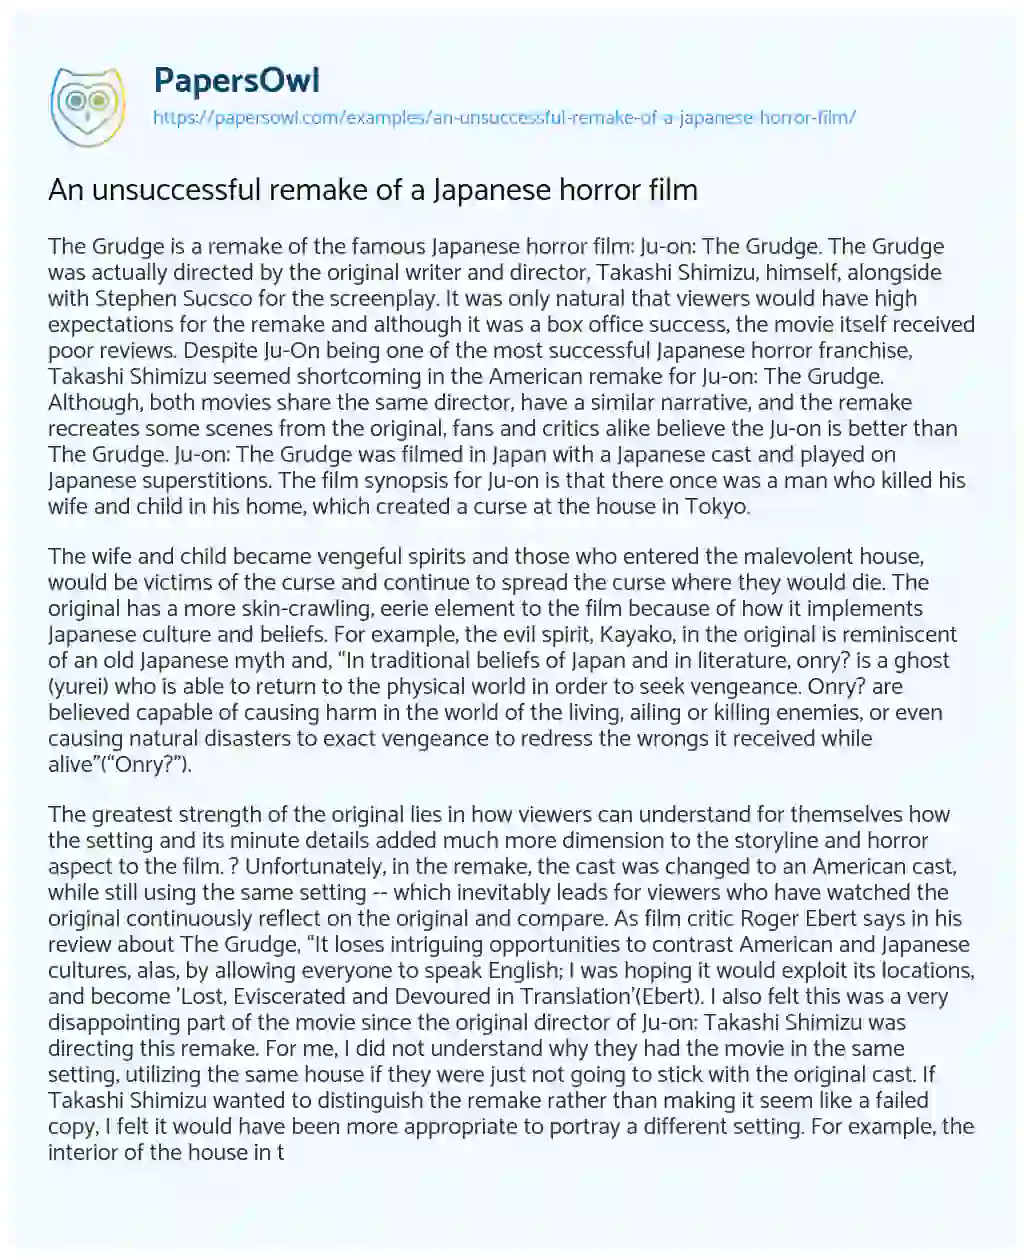 Essay on An Unsuccessful Remake of a Japanese Horror Film